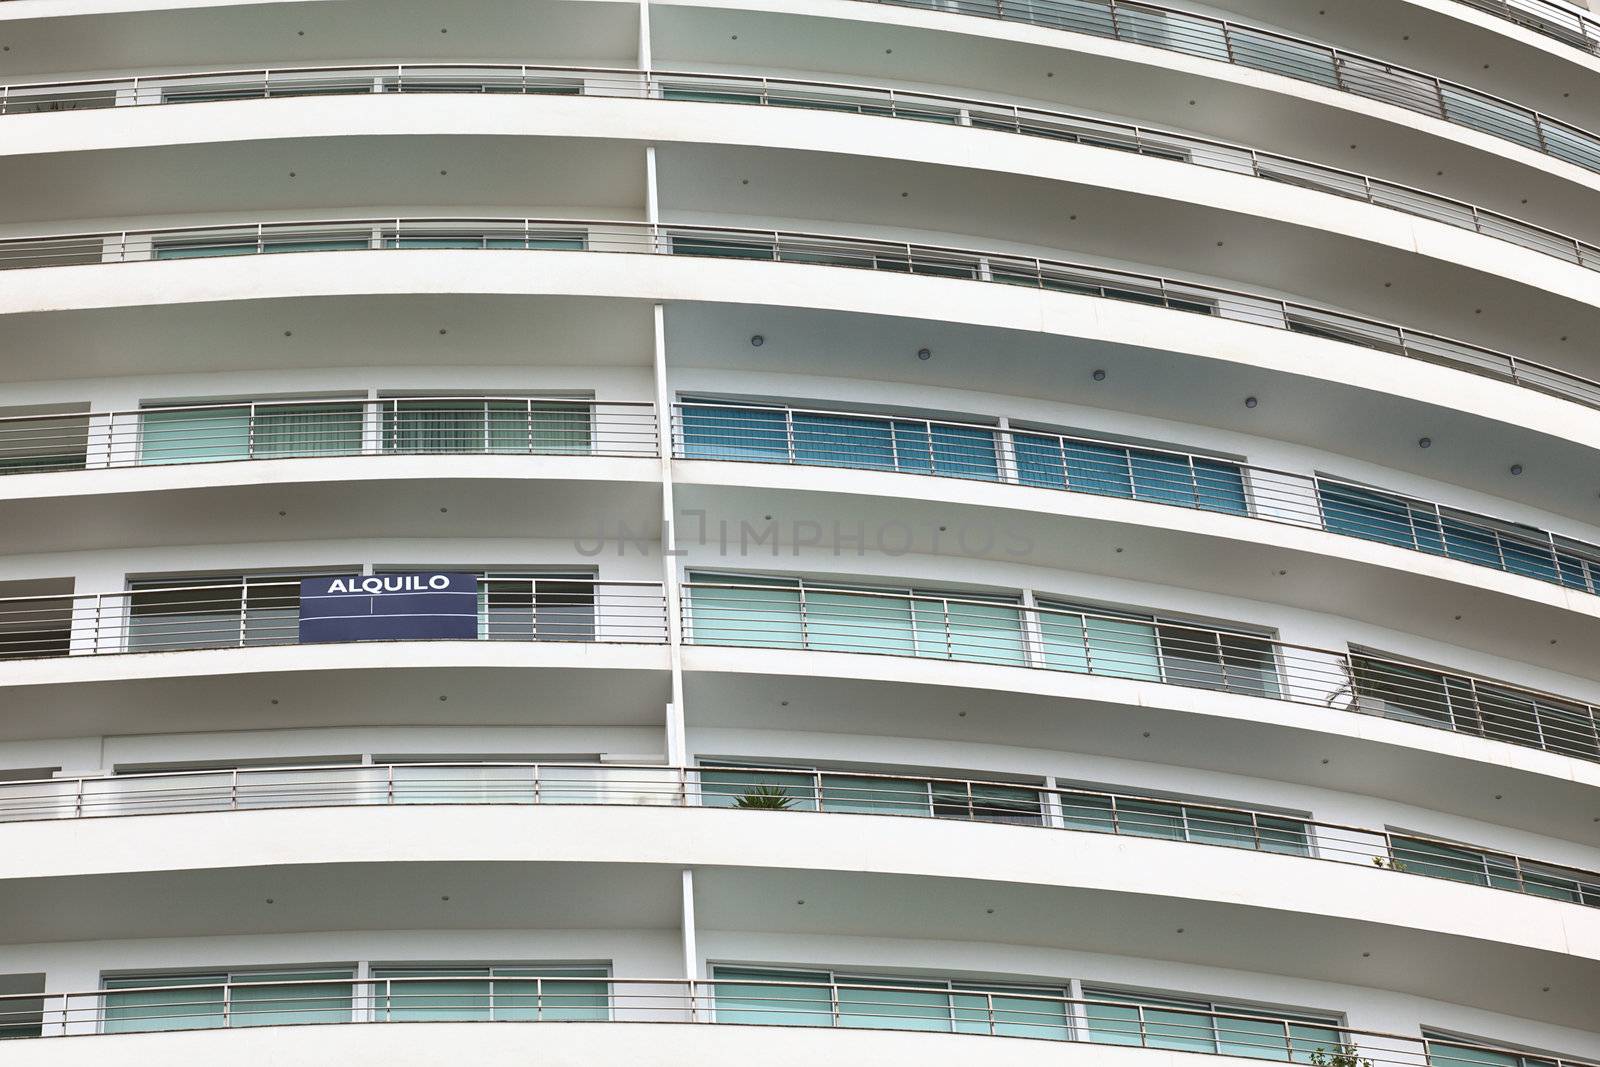 Detail of a modern multi-storey apartment building with balconies (alquilo means for rent)